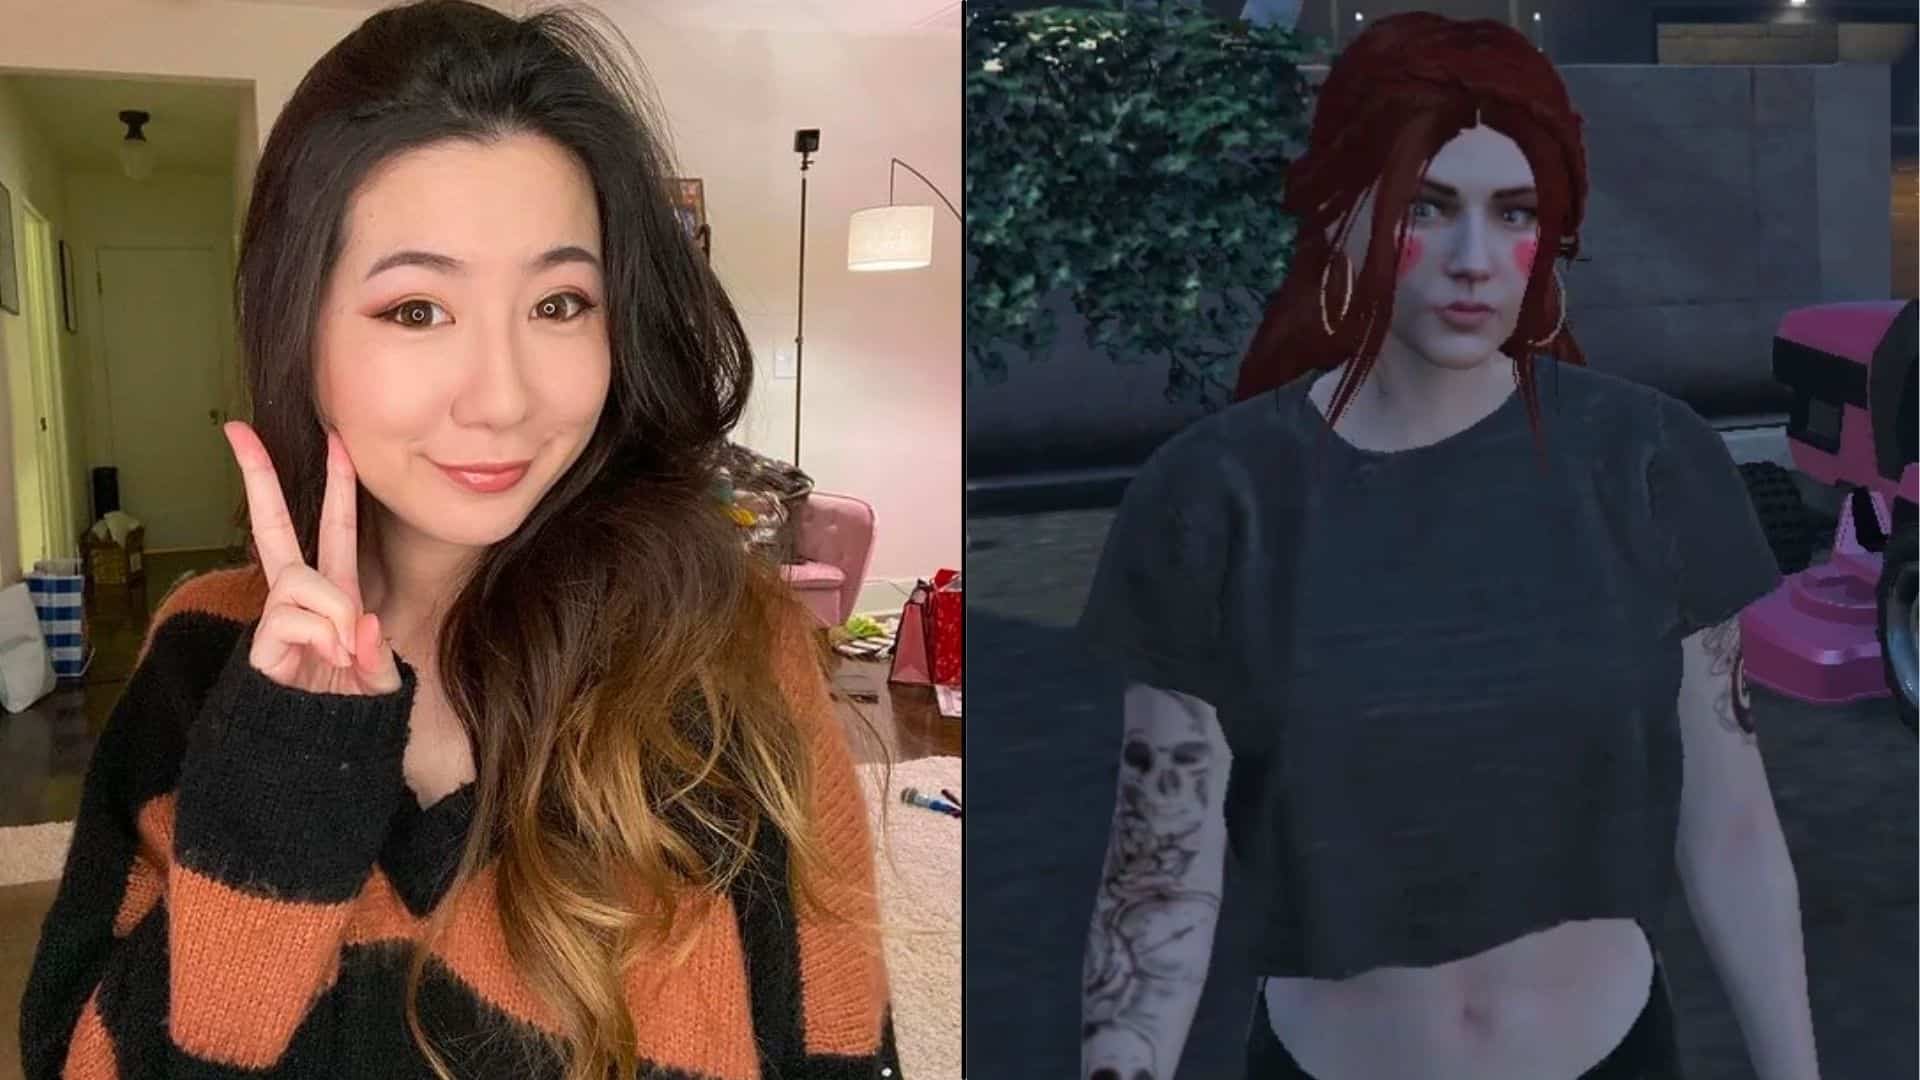 Fuslie and her April Fooze GTA RP character